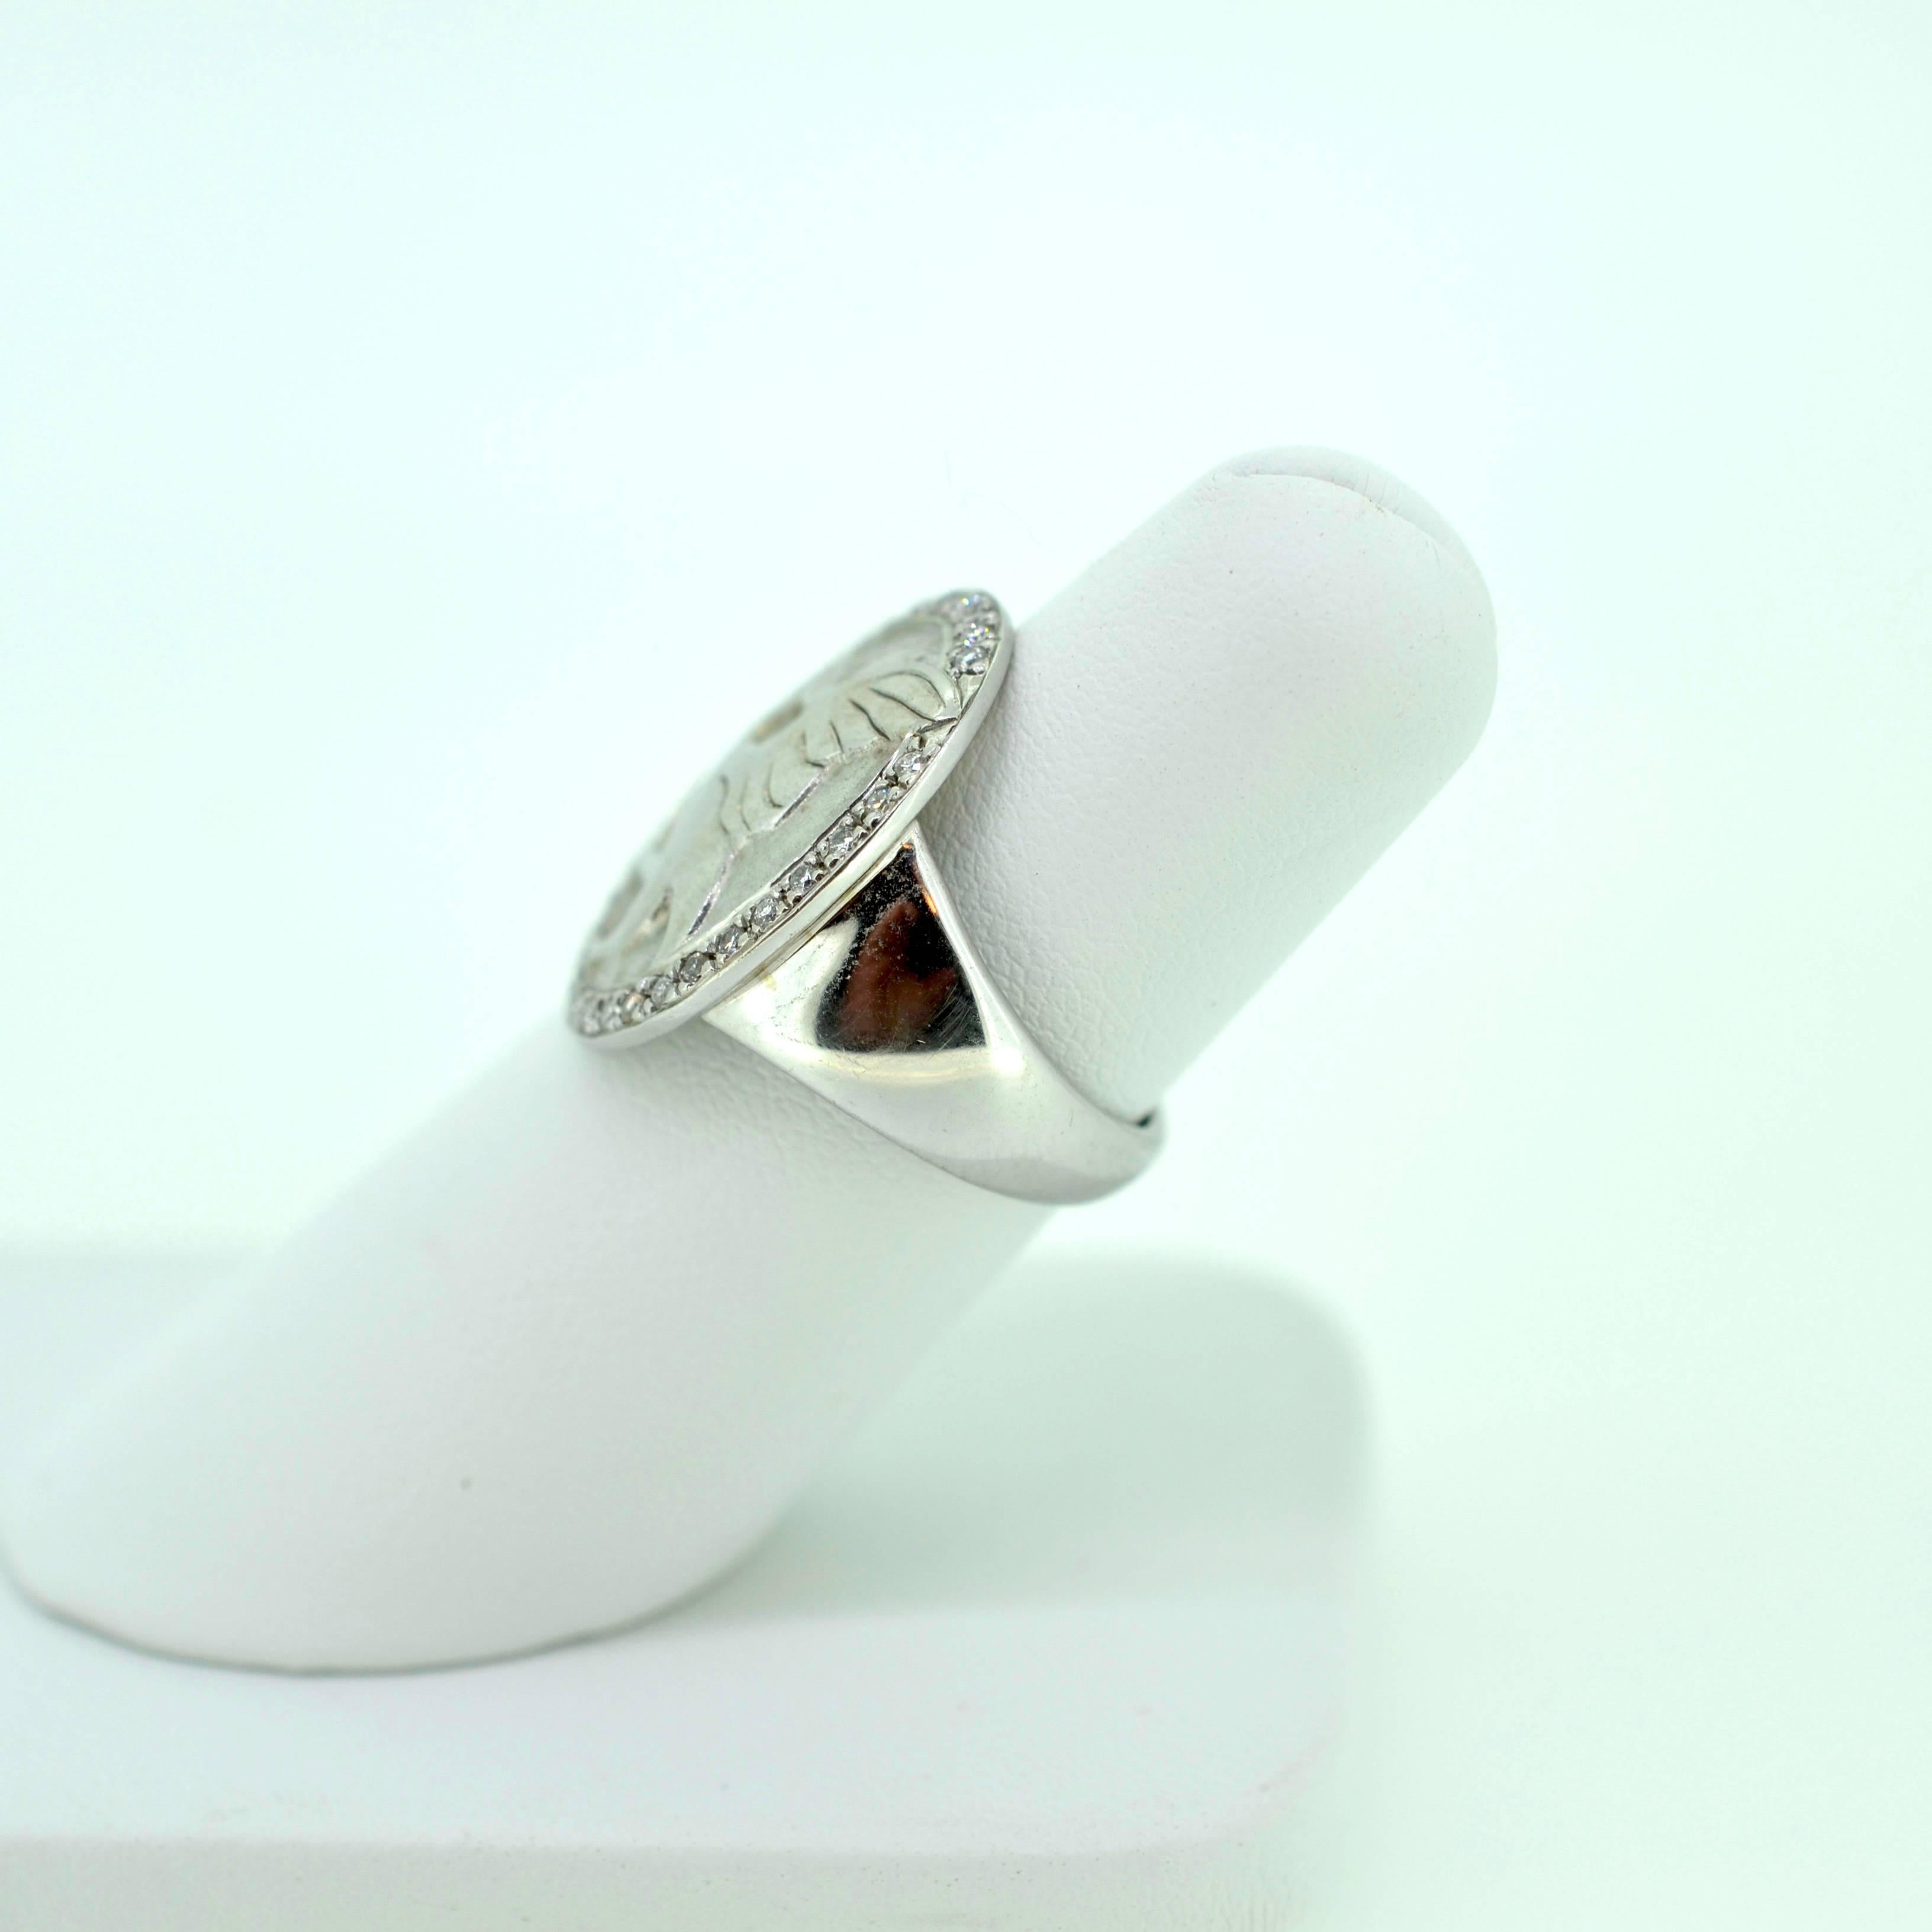 Phoenix ring;  hand carved and cast in 14 kt white gold.  The ring has an oval surface,  21mm x 18 mm in size and completely rimmed with full cut diamonds.    .50 ct. TW  VS clarity  G color   The ring tapers to 4.0 mm. 